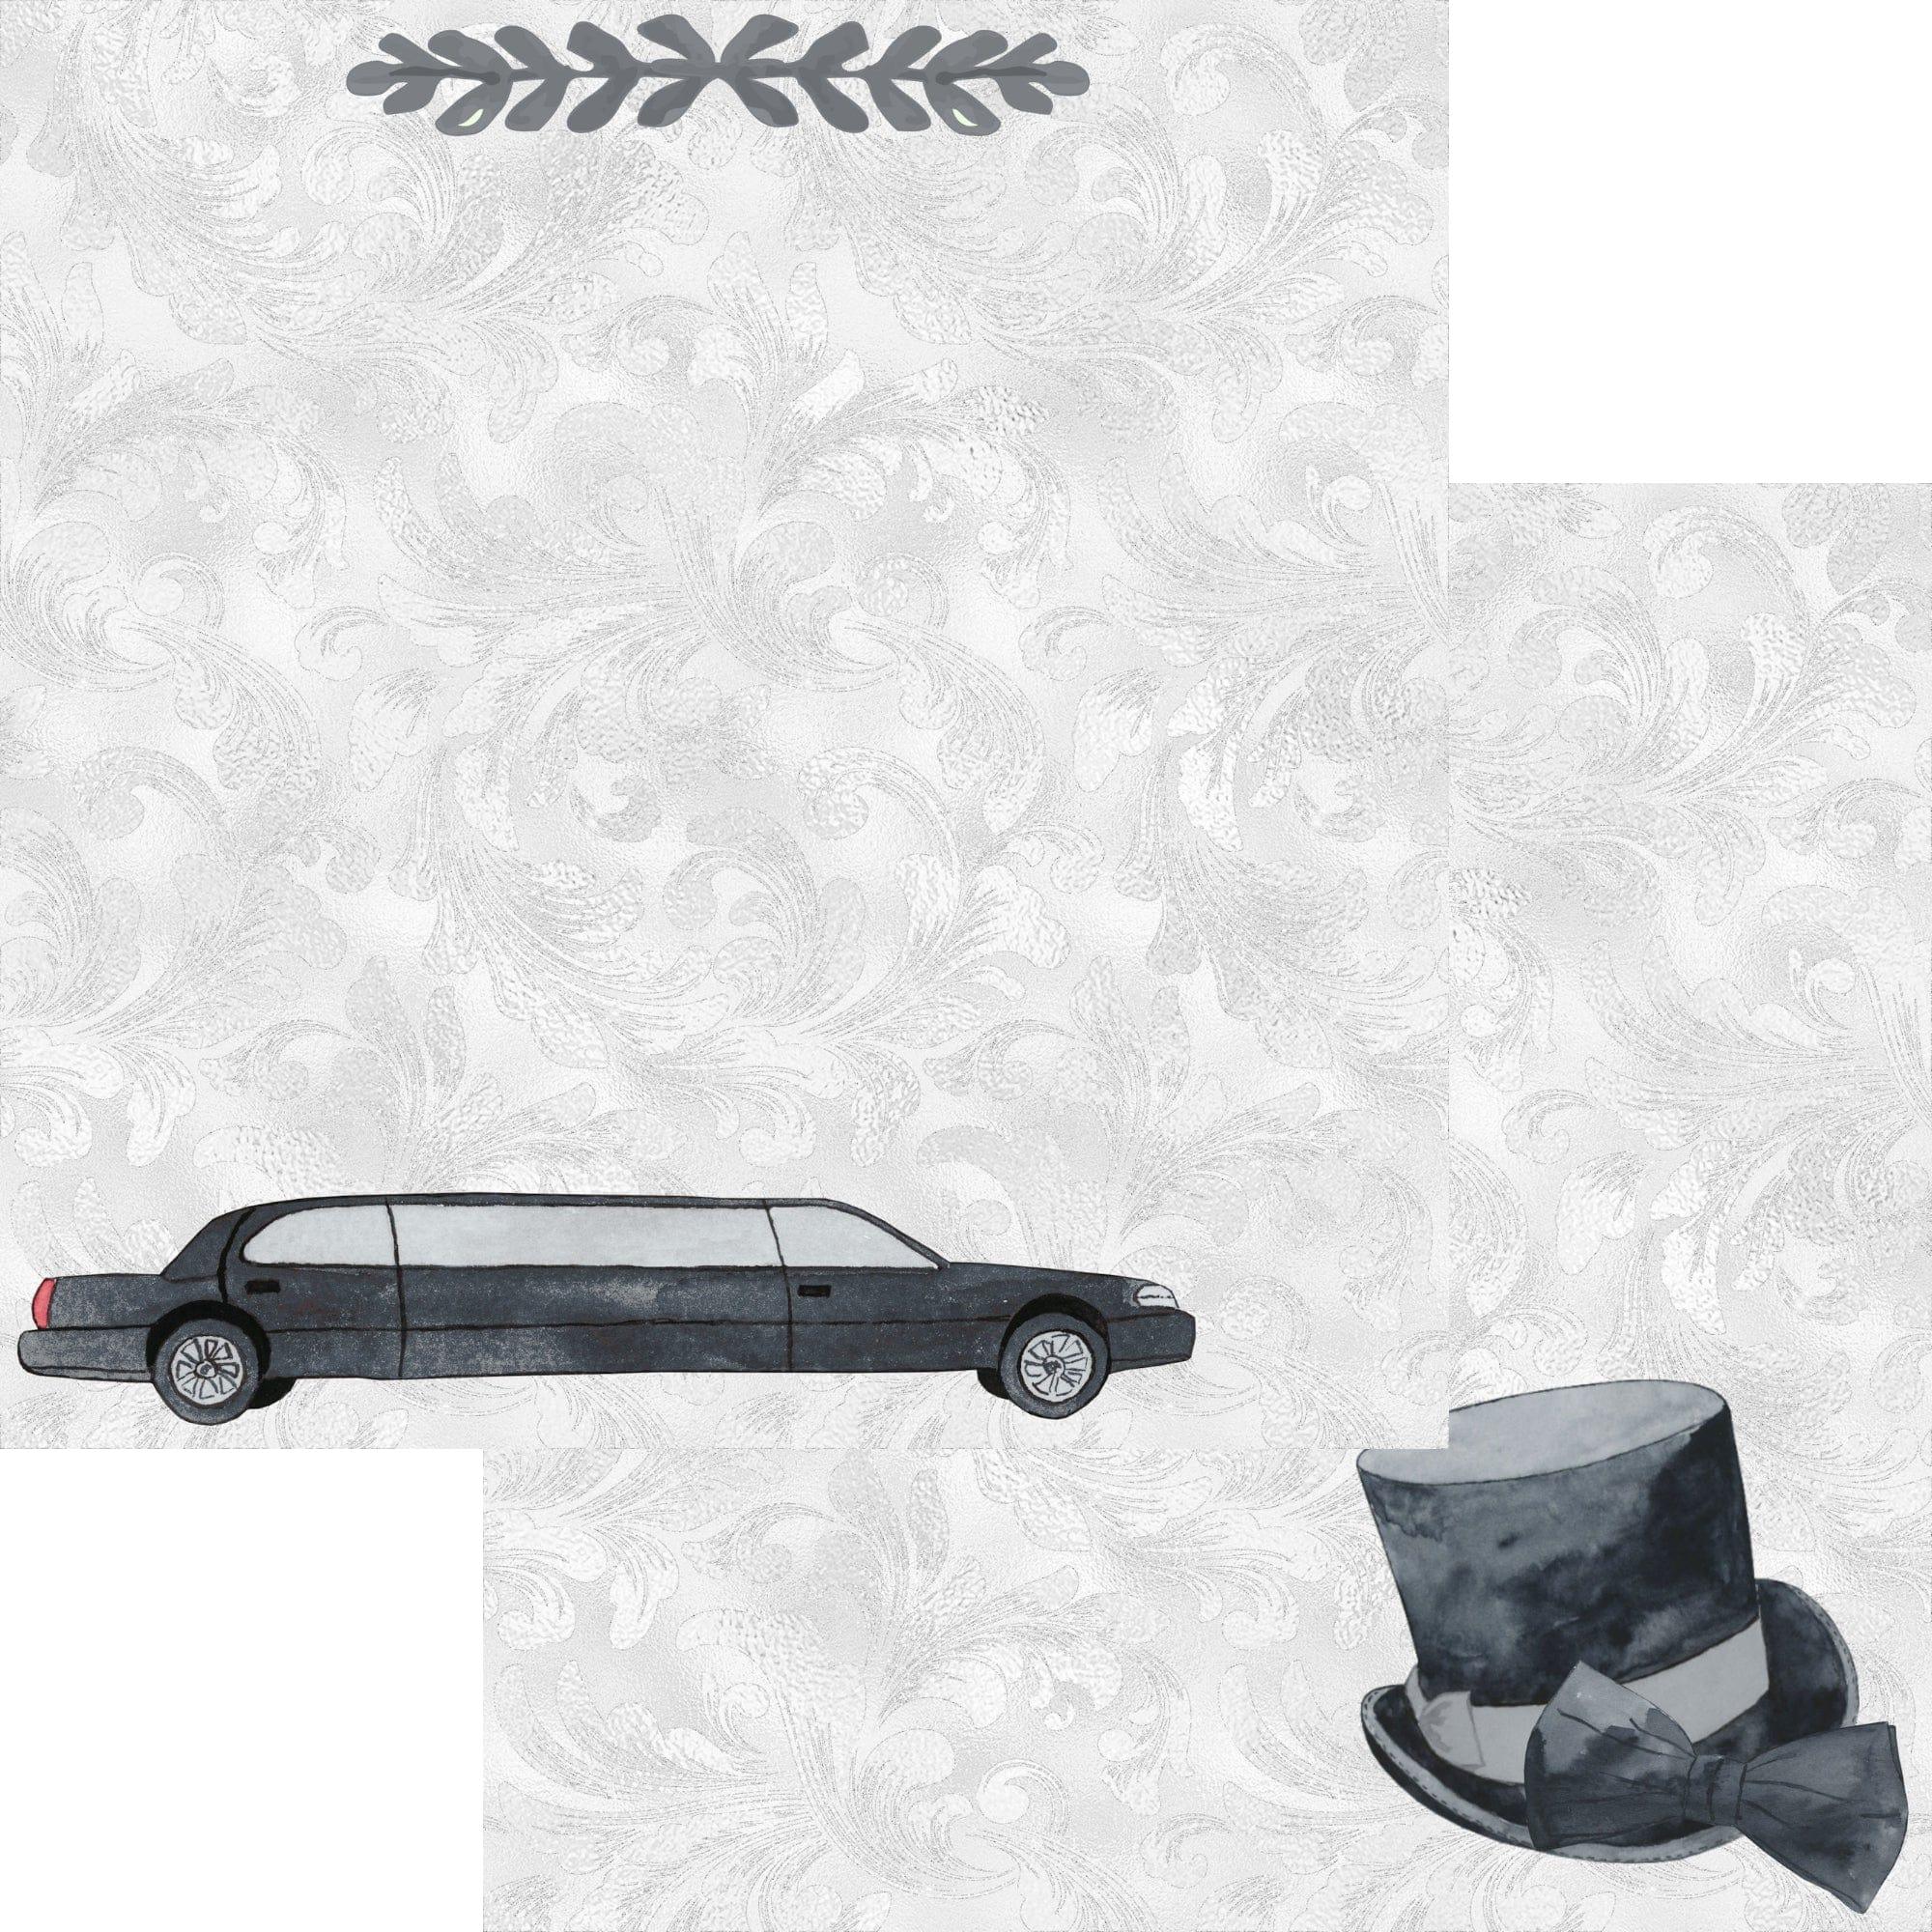 Prom Night Collection Limo Ride 12 x 12 Double-Sided Scrapbook Paper by SSC Designs